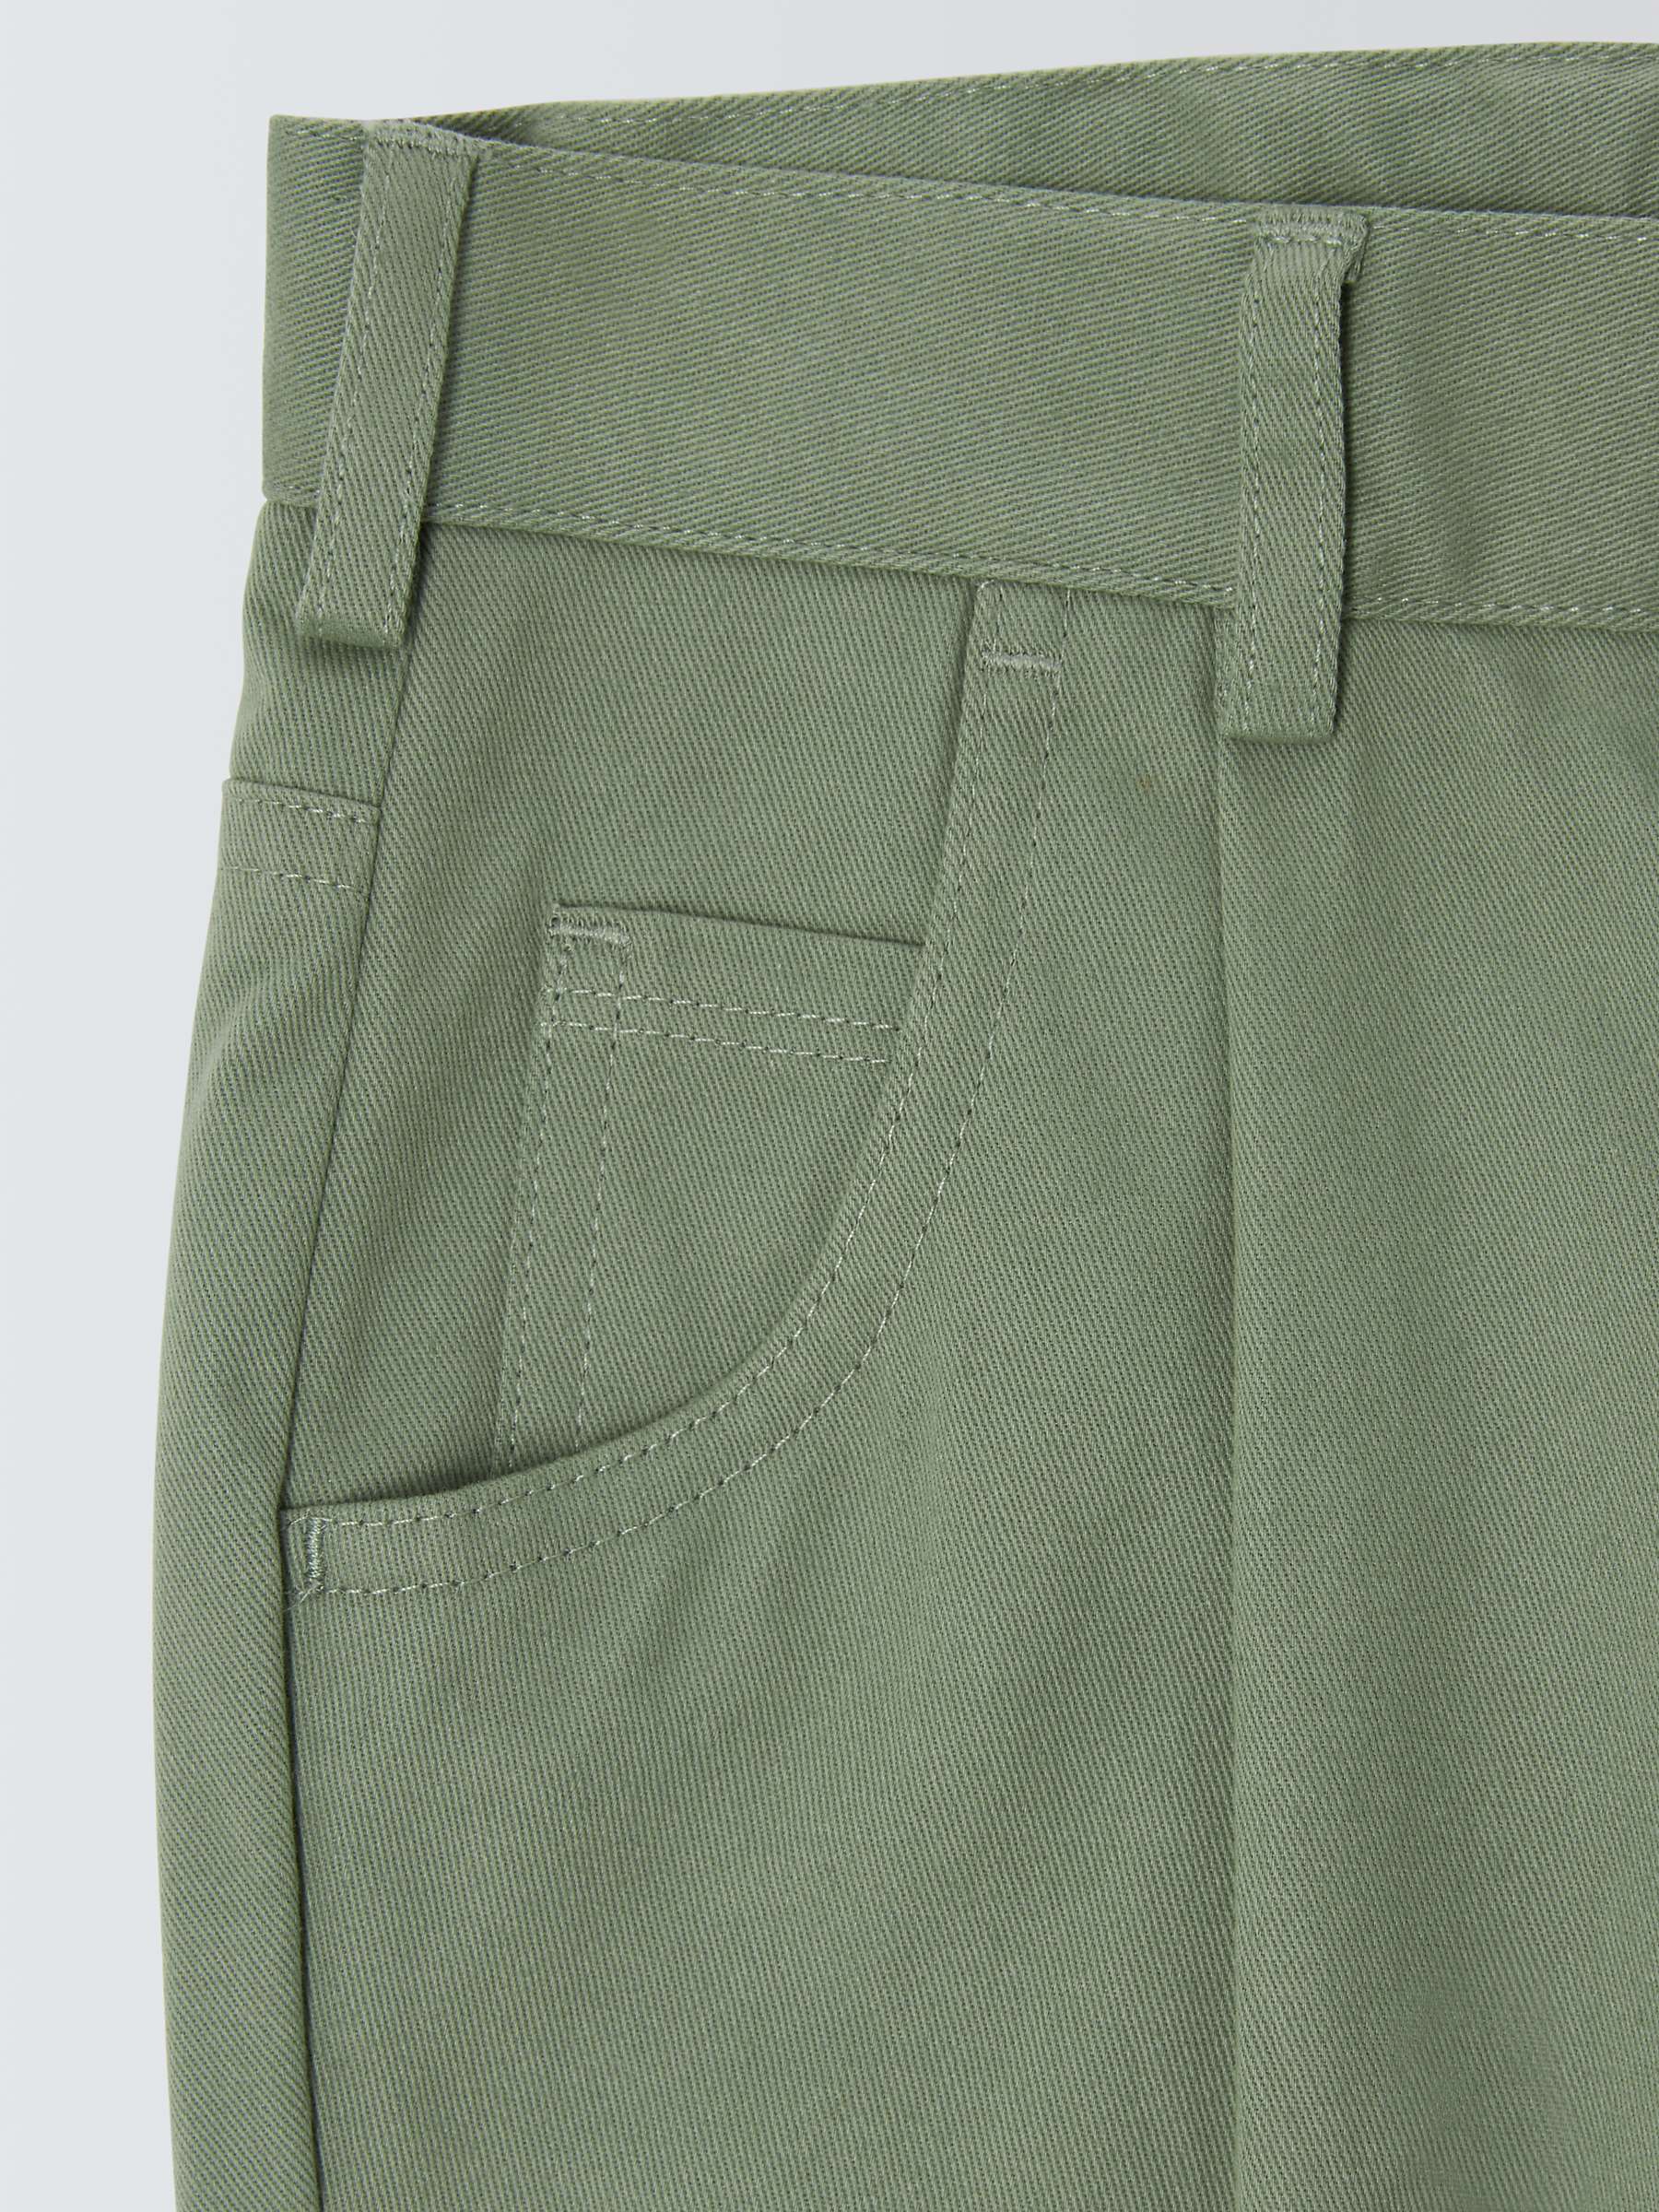 Buy John Lewis Heirloom Collection Kids' Twill Trousers, Green Online at johnlewis.com